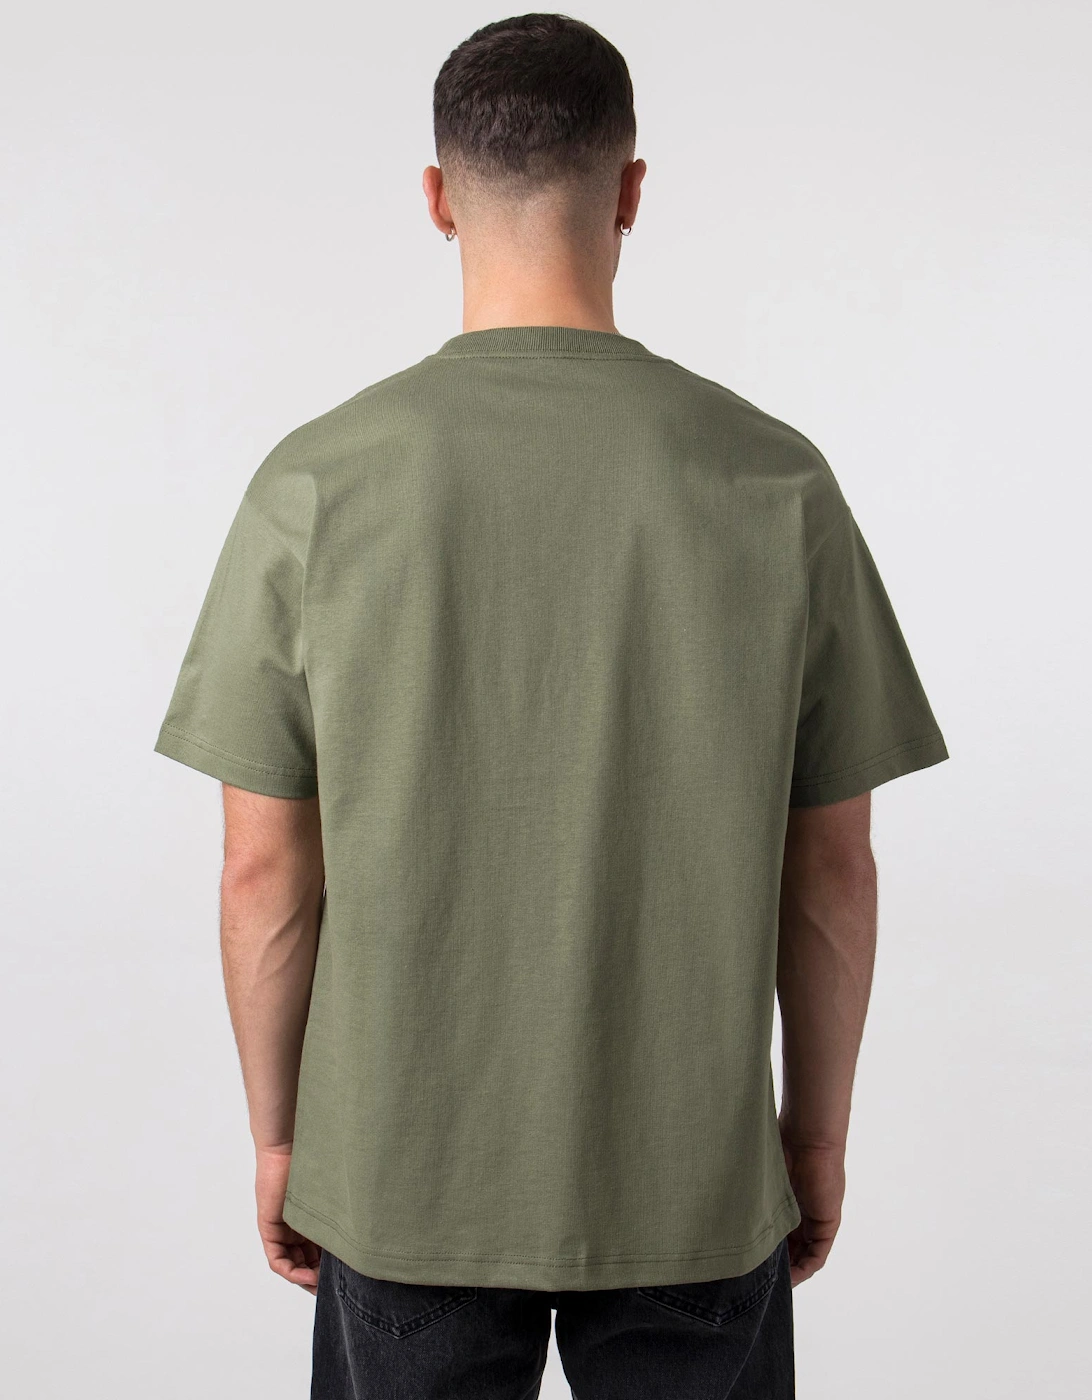 Relaxed Fit Warm Embrace T-Shirt